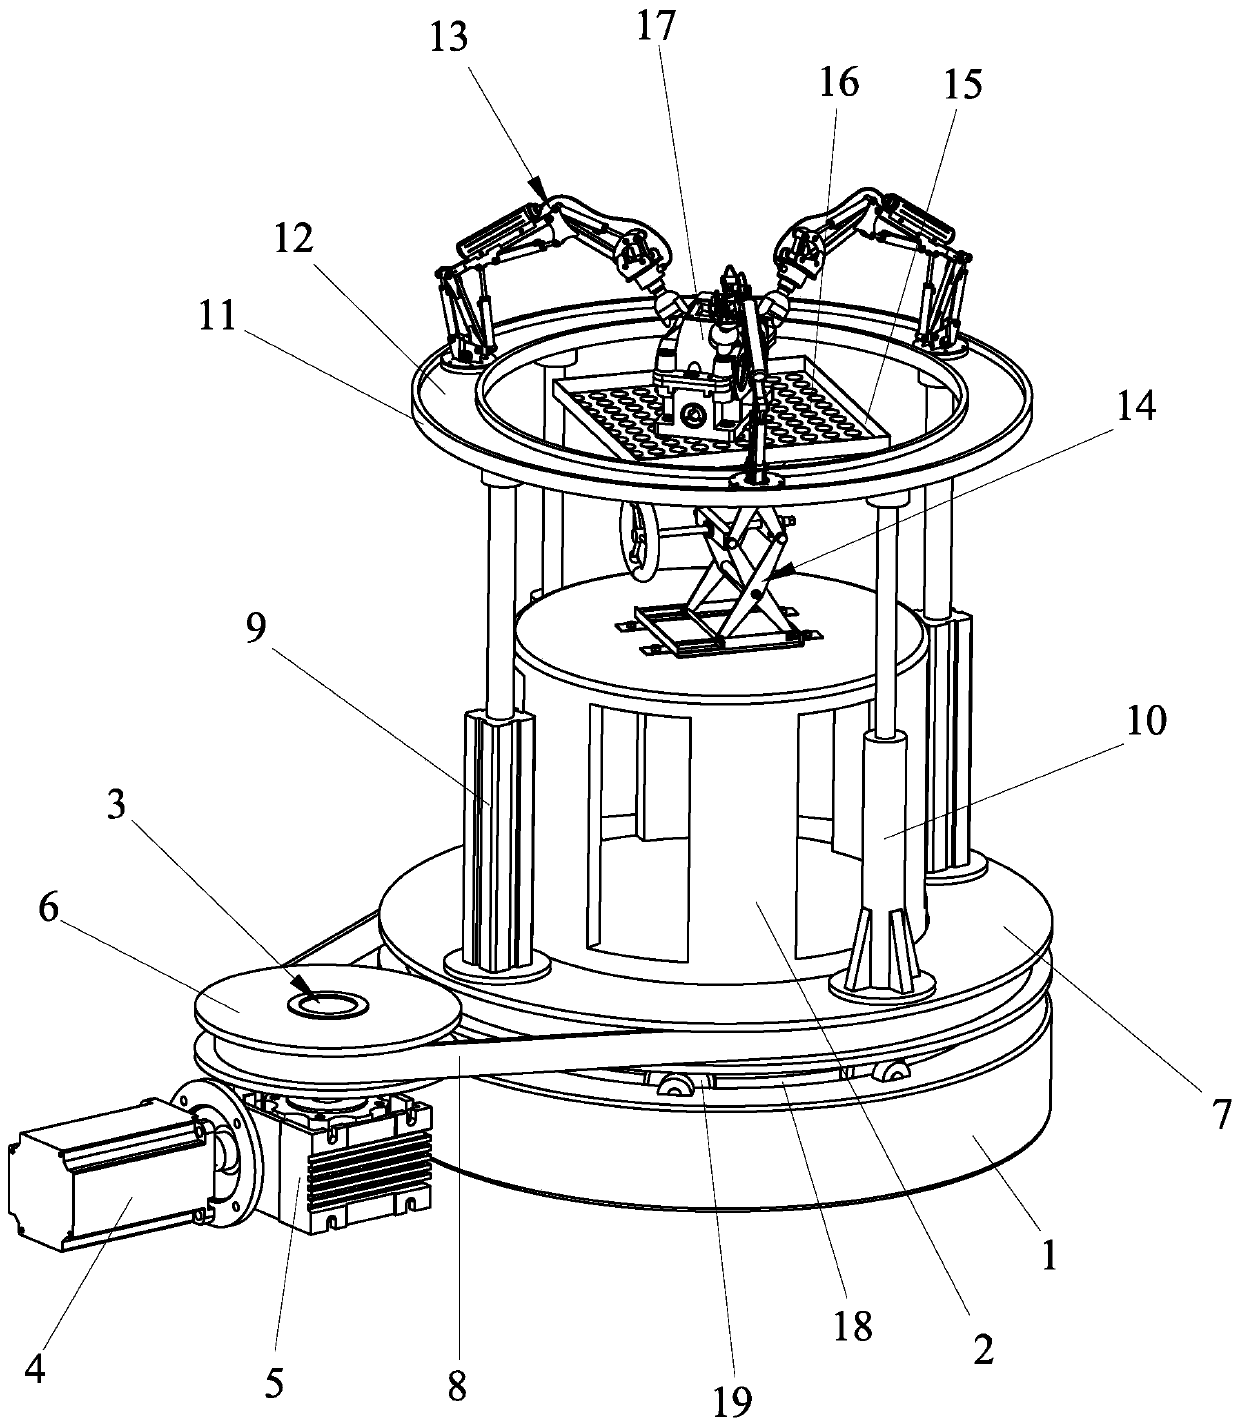 Paint spraying device for submerged speed reducer